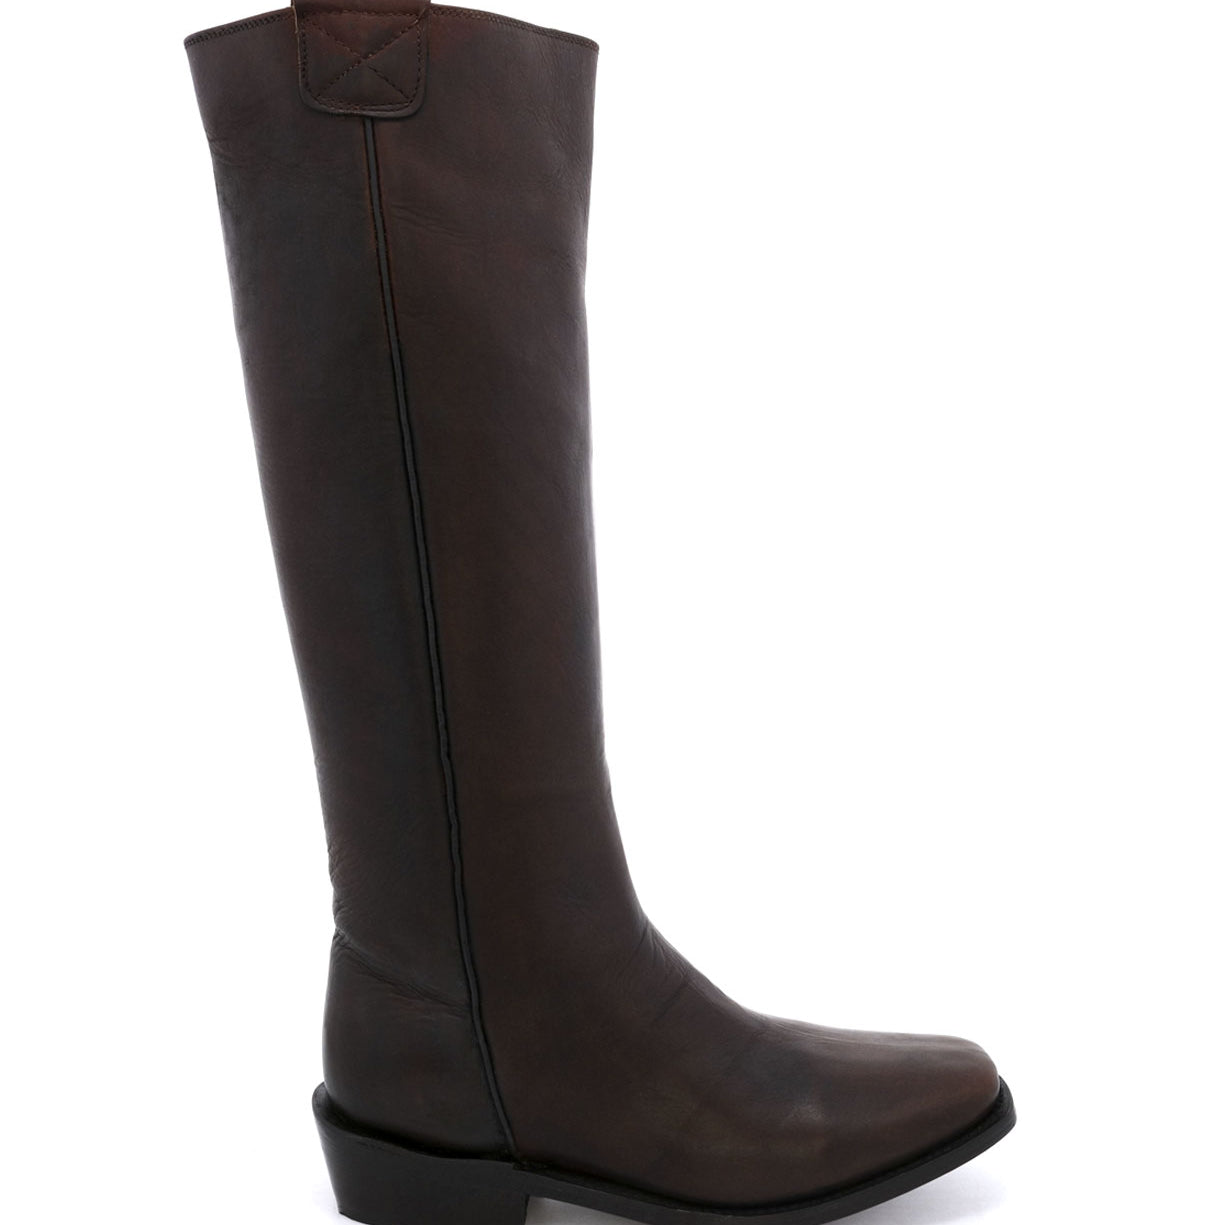 A women's Pale Rider boot by Oak Tree Farms on a white background.